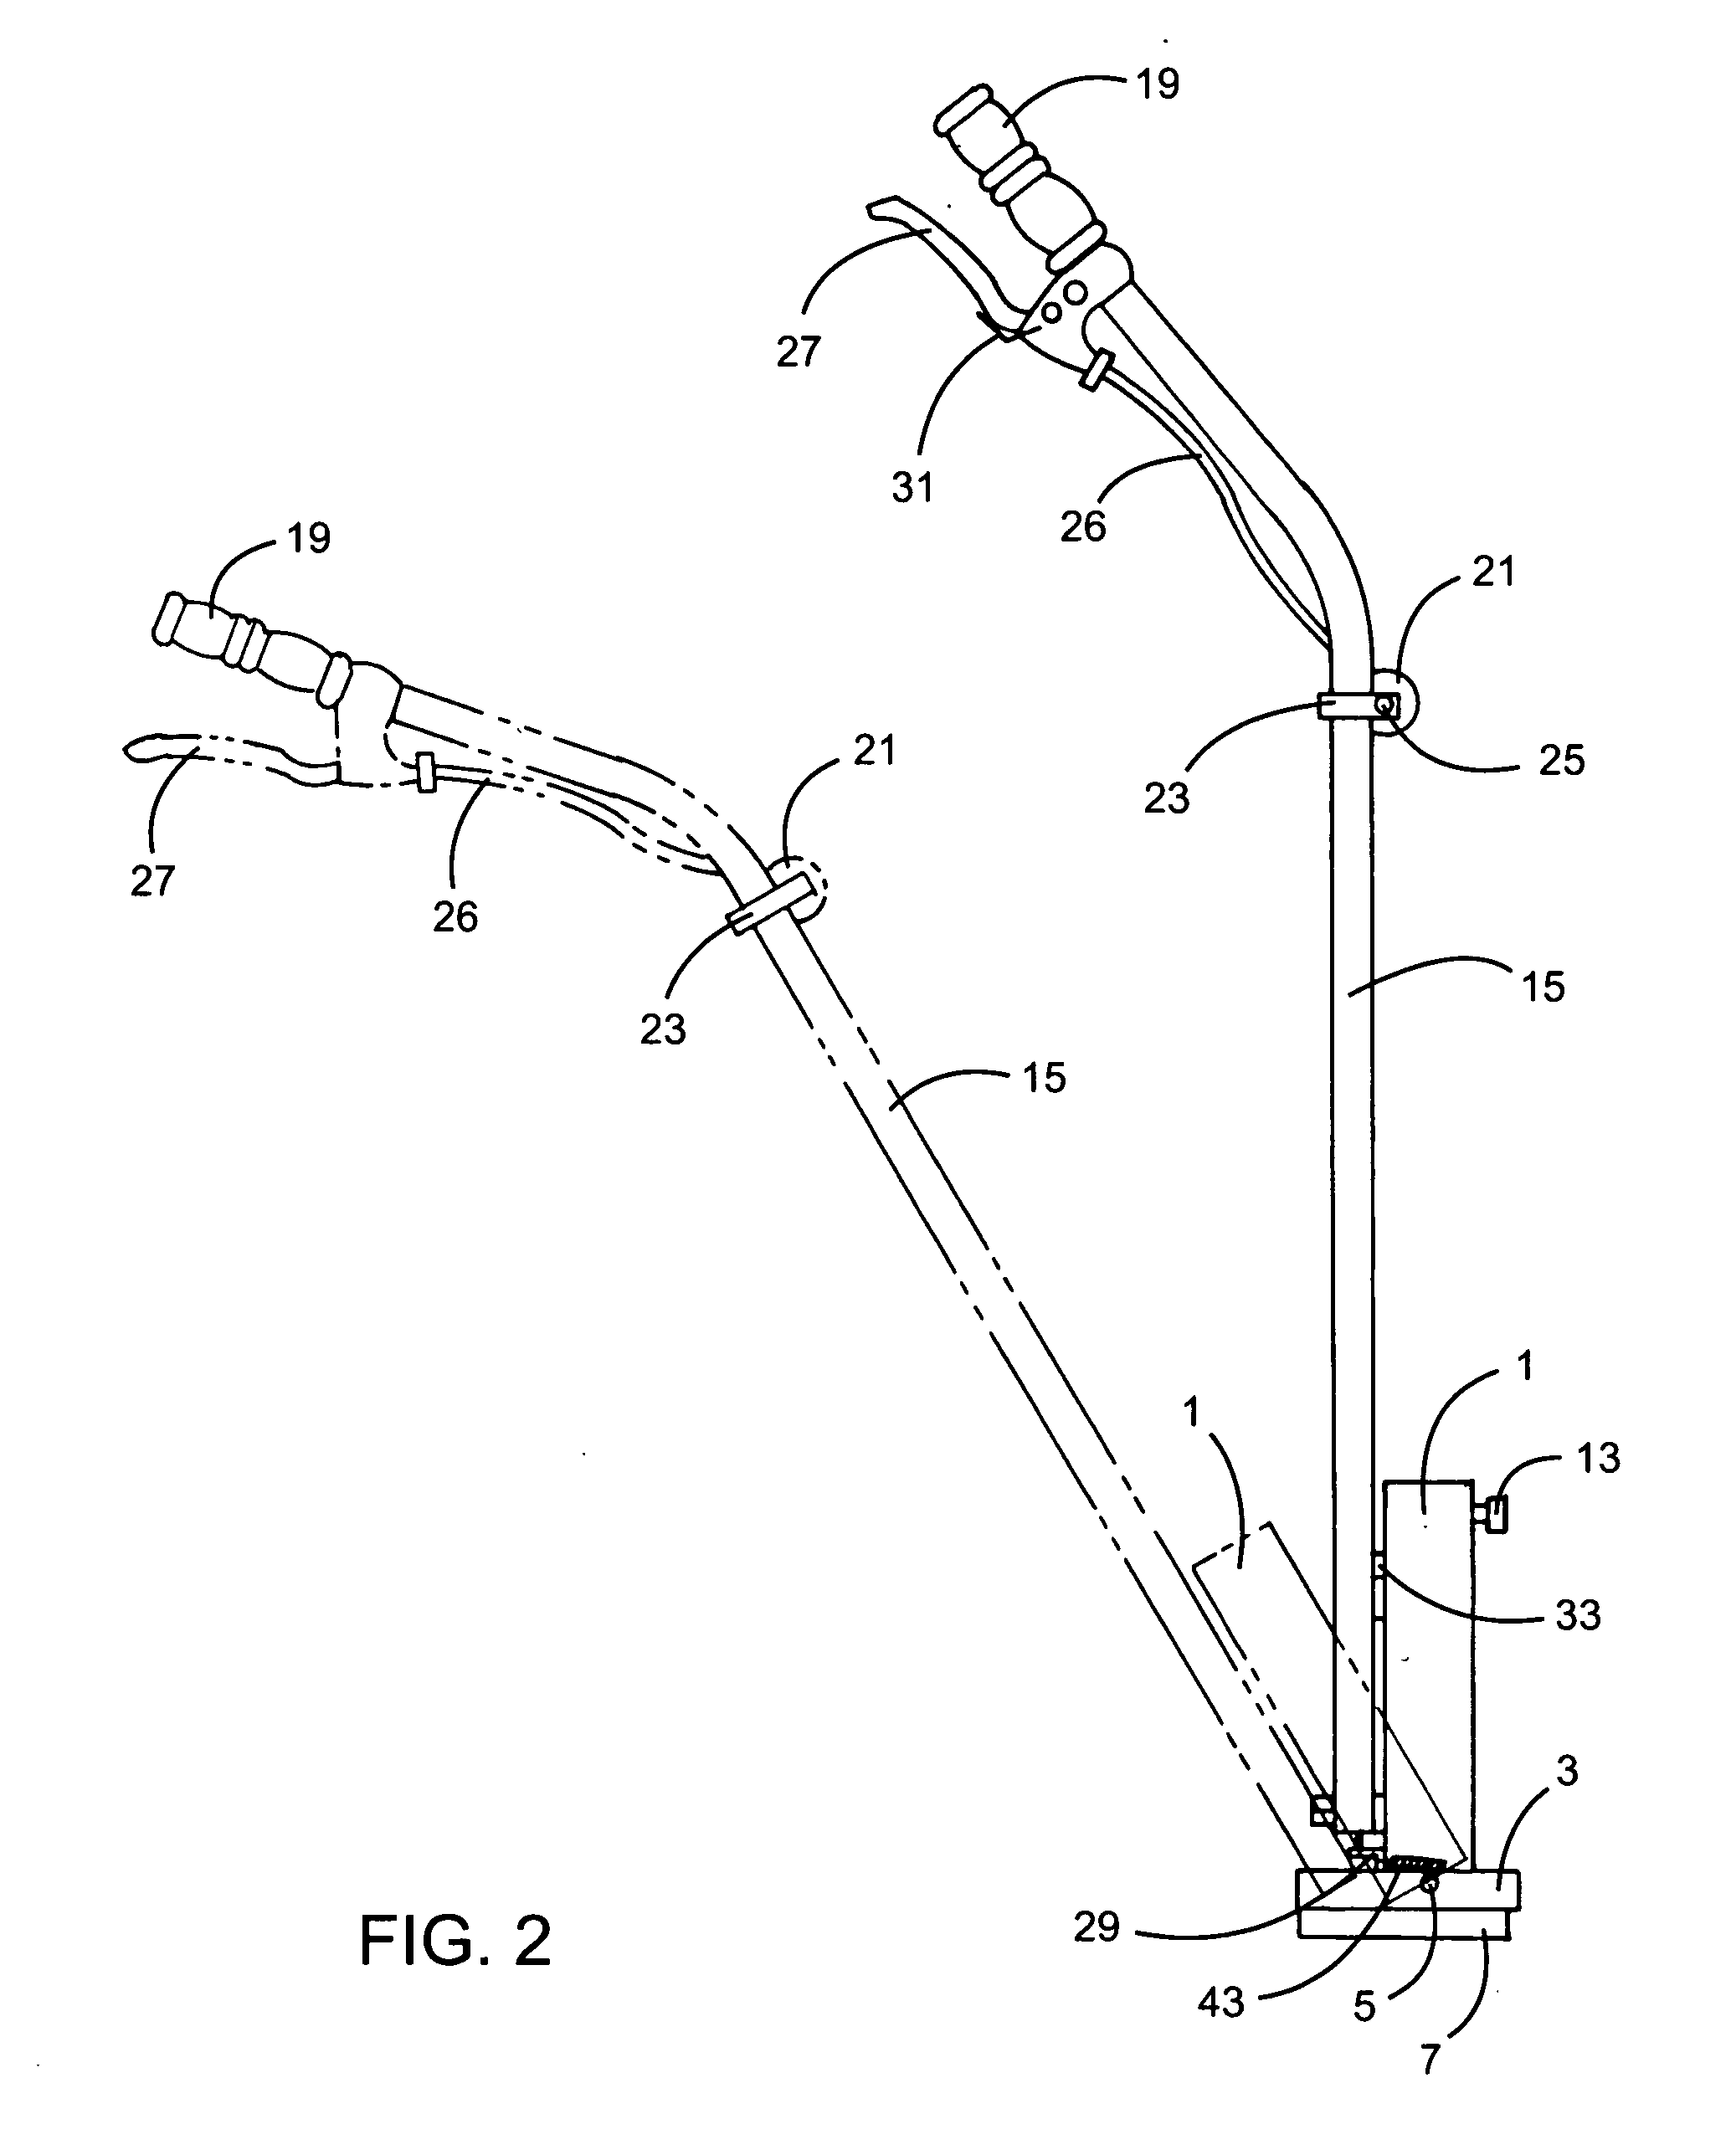 Spreading apparatus for flowable materials